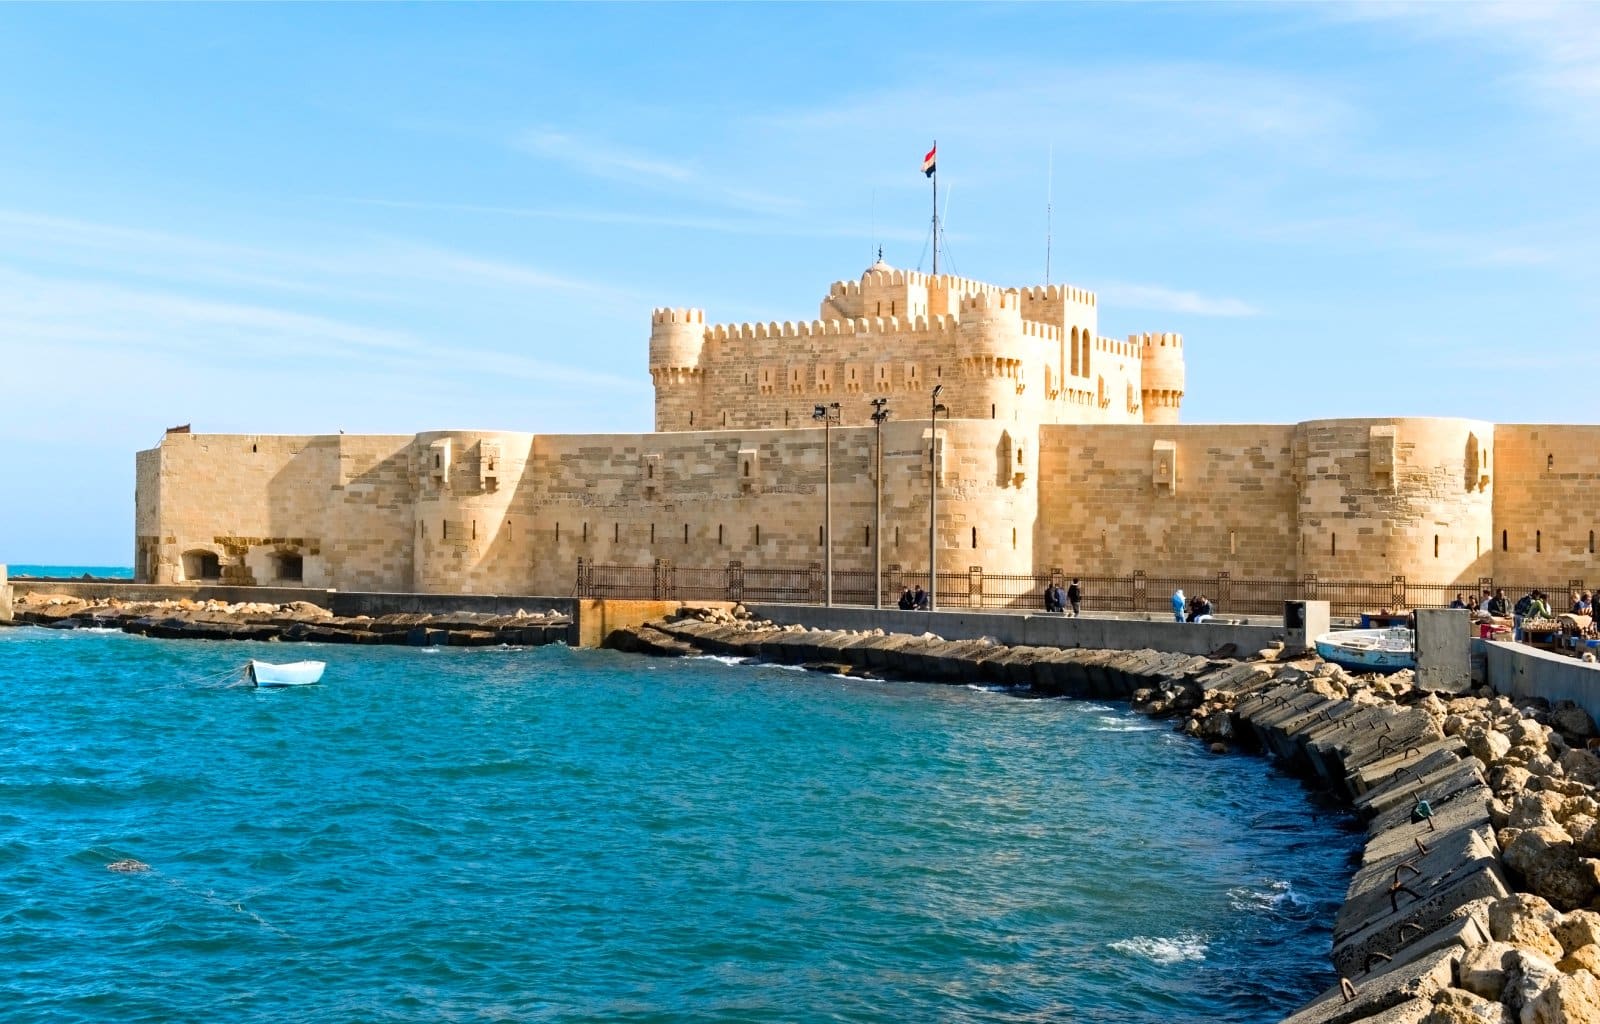 <p class="wp-caption-text">Image Credit: Shutterstock / krechet</p>  <p><span>Alexandria, the pearl of the Mediterranean, is steeped in history and culture, offering a refreshing contrast to Egypt’s inland wonders. Founded by Alexander the Great in 331 BC, this city was once the seat of learning and culture in the ancient world. Today, Alexandria invites visitors to explore its rich past through well-preserved Roman ruins, the modern Bibliotheca Alexandrina, and the serene Mediterranean Seafront. The city’s cosmopolitan atmosphere is palpable in its vibrant cafes, seafood restaurants, and bustling markets. Key historical sites include the Roman Amphitheatre, the catacombs of Kom el Shoqafa, and the Citadel of Qaitbay, which stands on the site of the ancient Lighthouse of Alexandria, one of the Seven Wonders of the Ancient World. Strolling along the Corniche, visitors can soak in the city’s bustling energy and Mediterranean breezes, offering a moment of reflection on the enduring legacy of this ancient metropolis.</span></p>